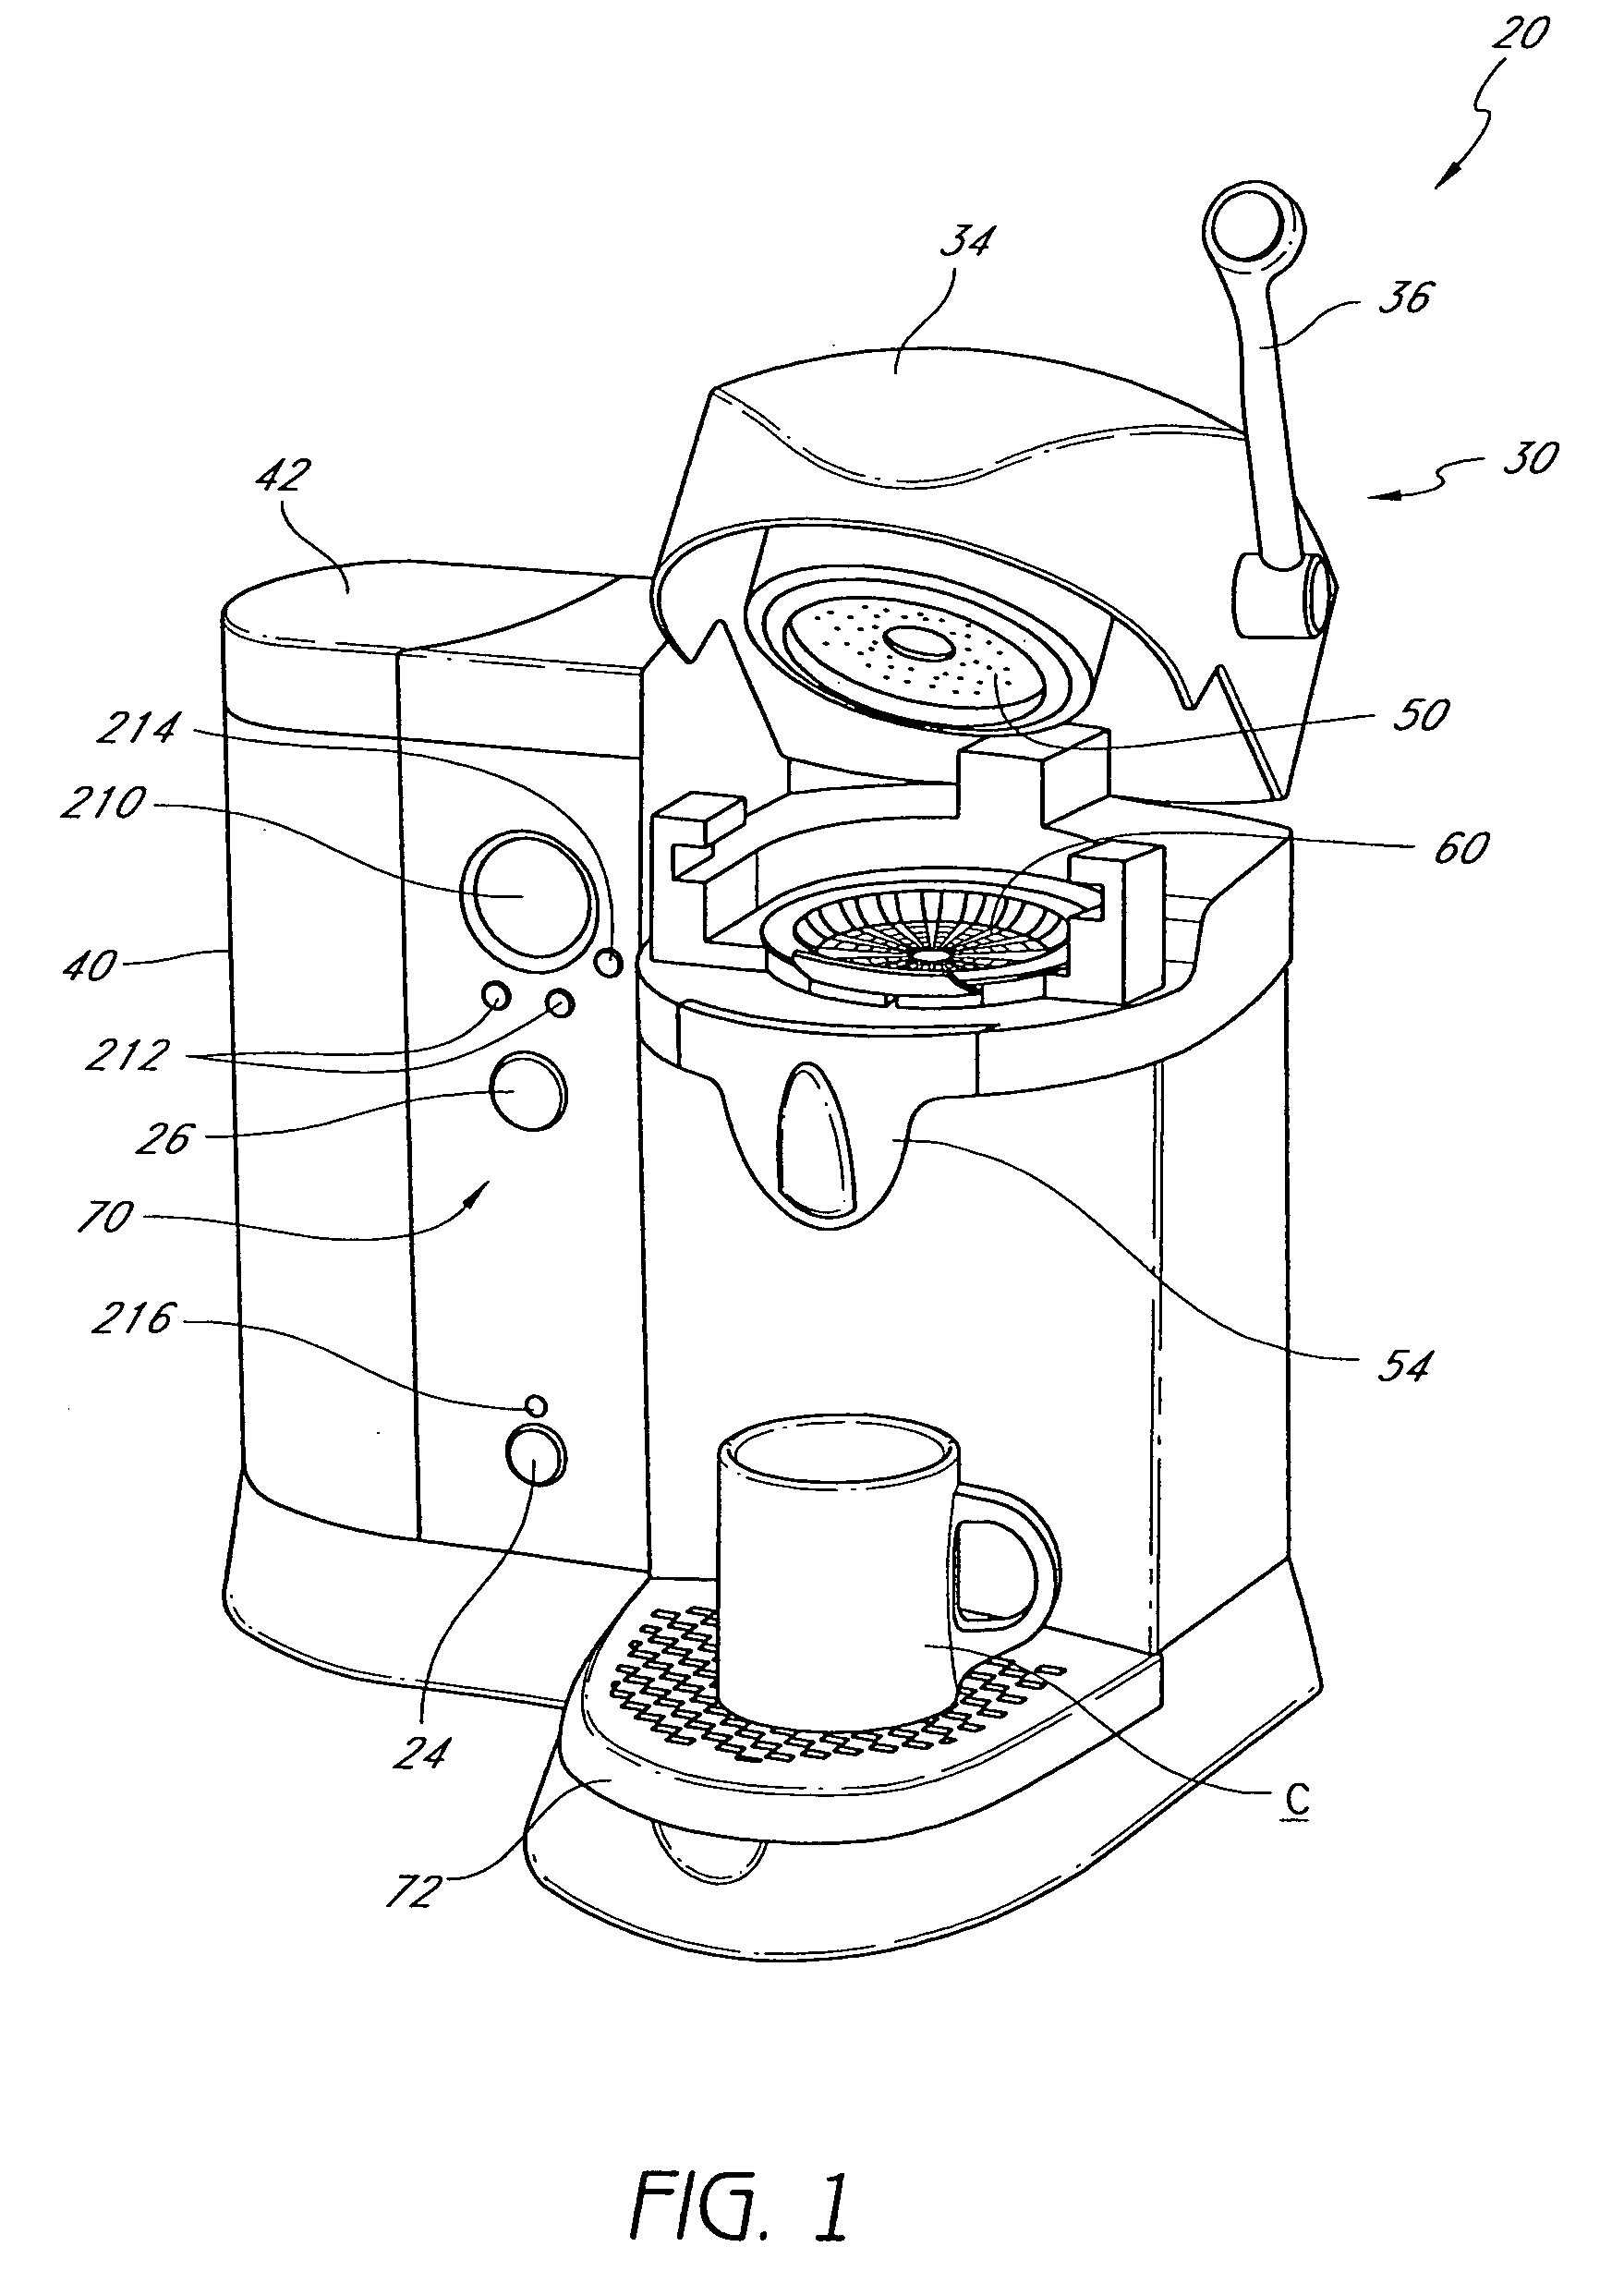 Hot beverage brewing device